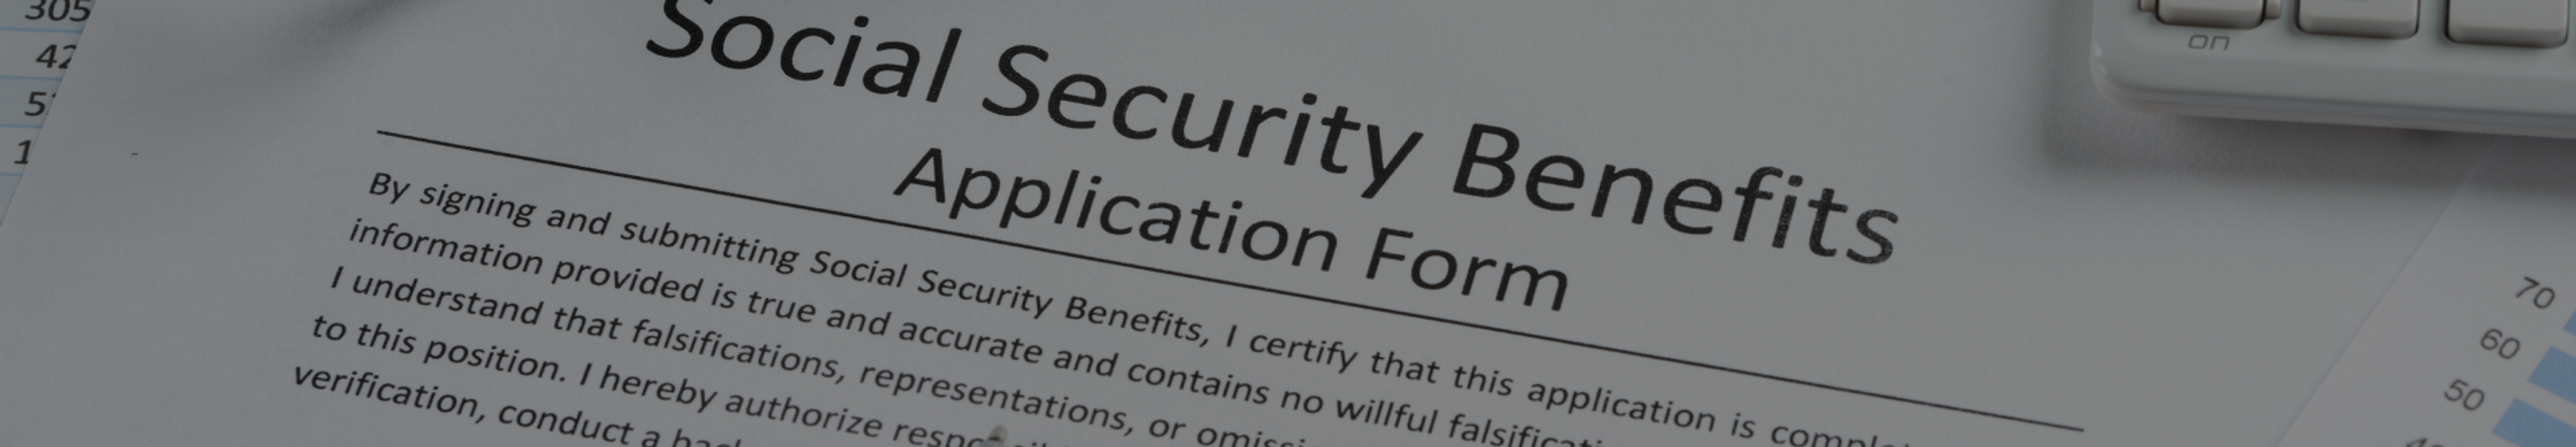 Issuing a Social Security Number (SSN)